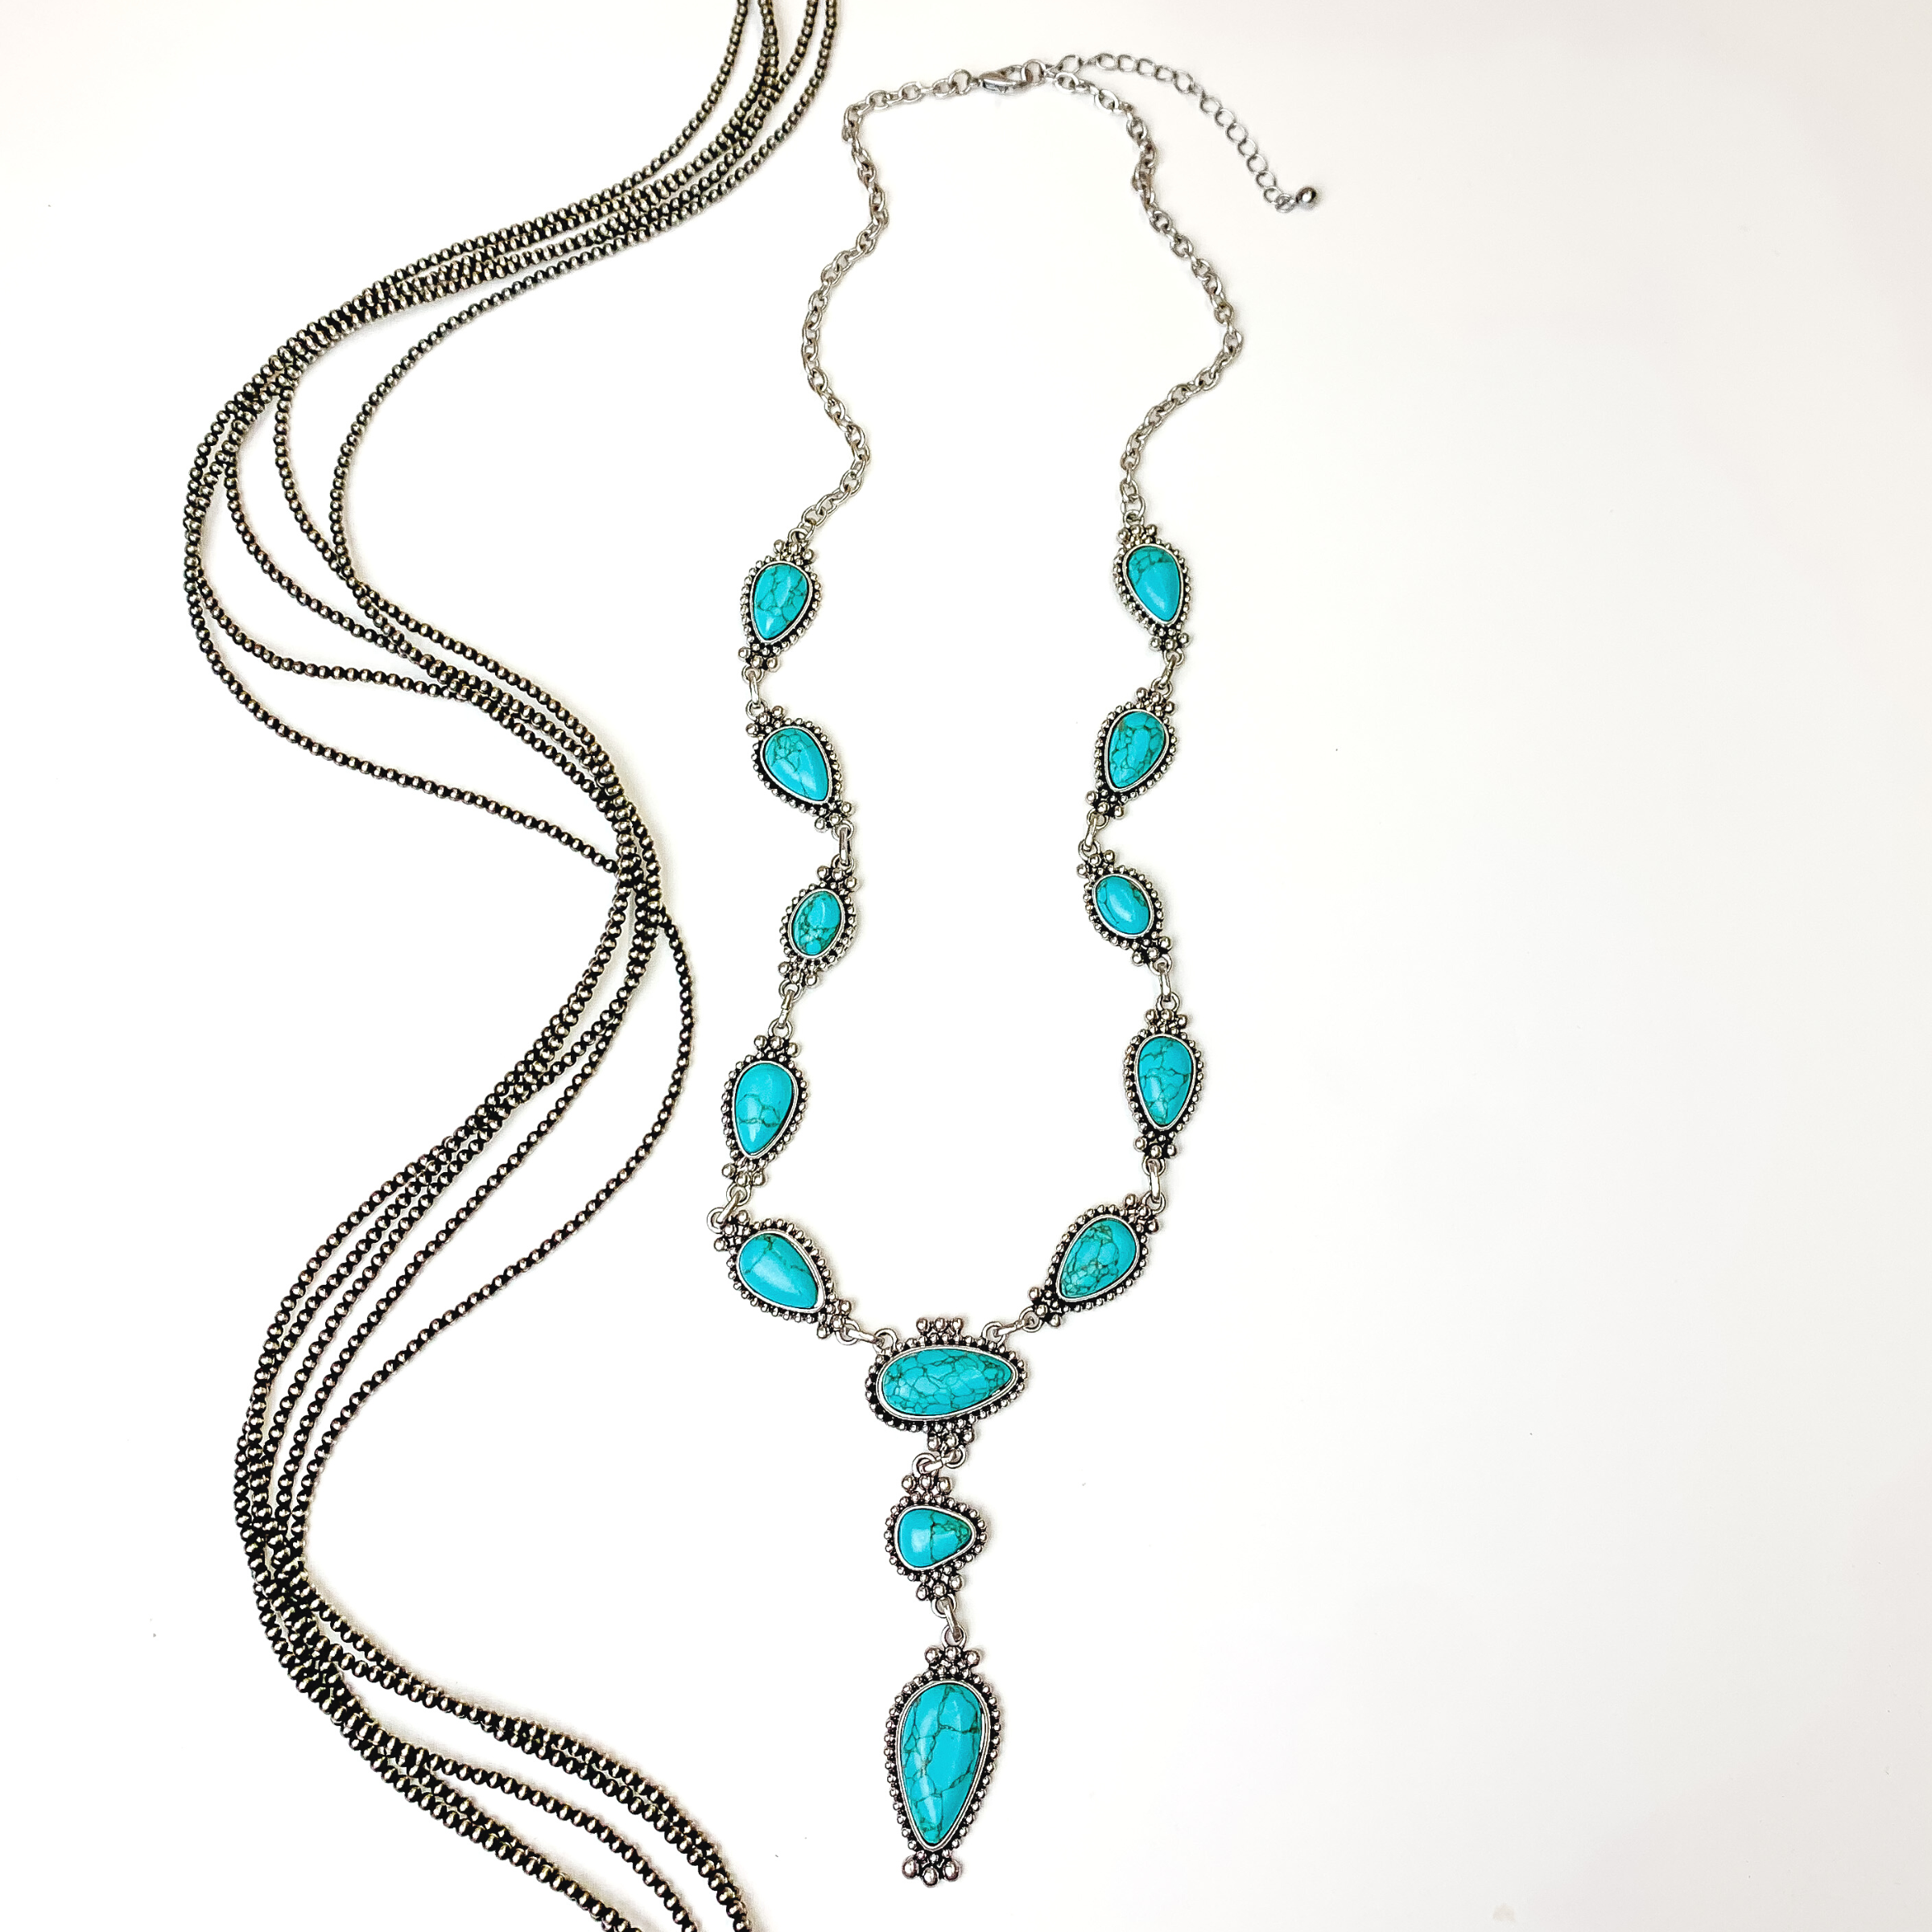 Tried and True Faux Navajo Lariat Necklace with Turquoise Stones - Giddy Up Glamour Boutique